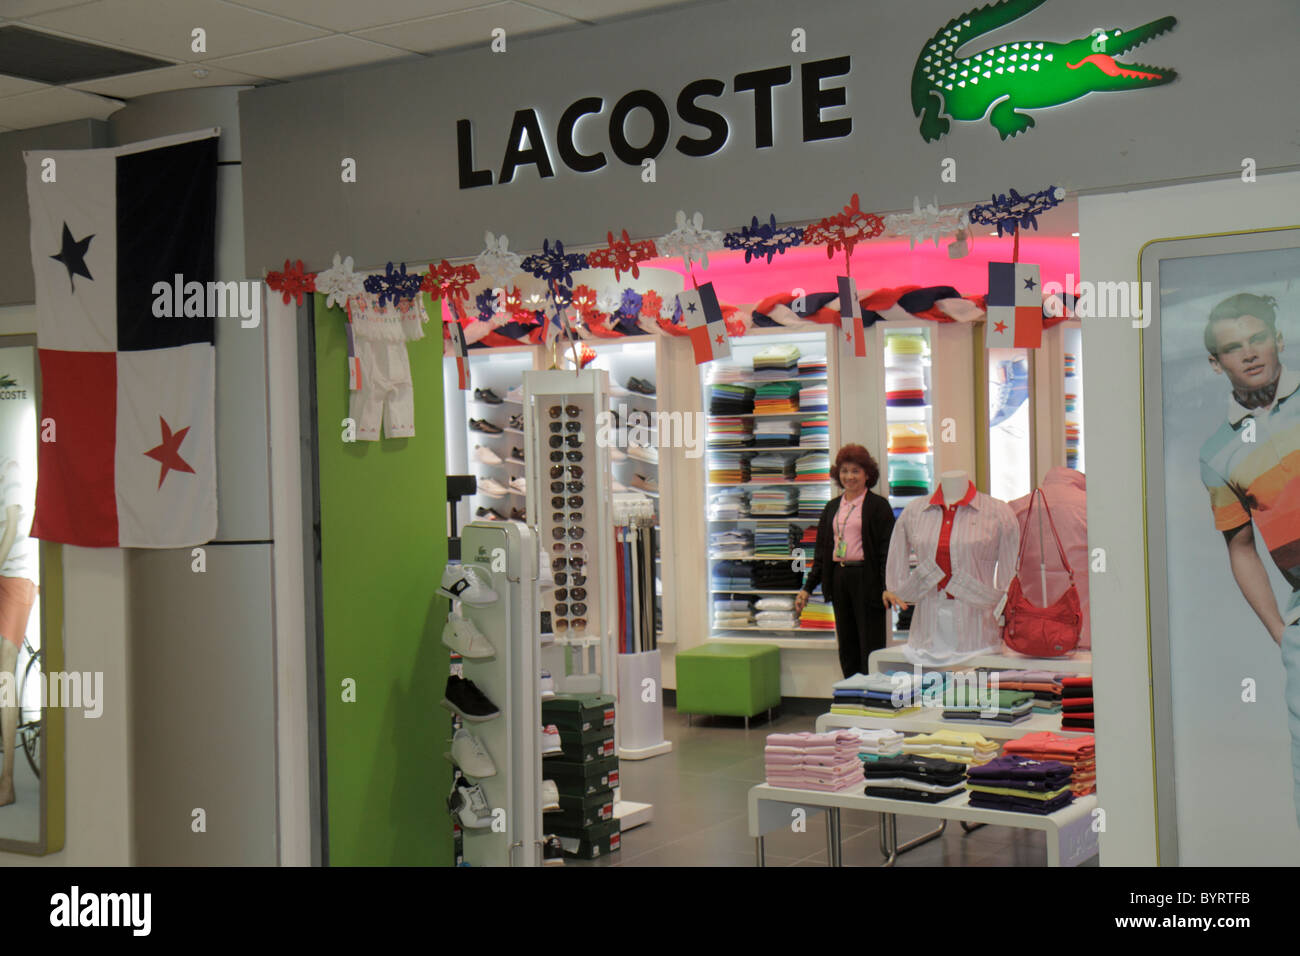 shops that sell lacoste